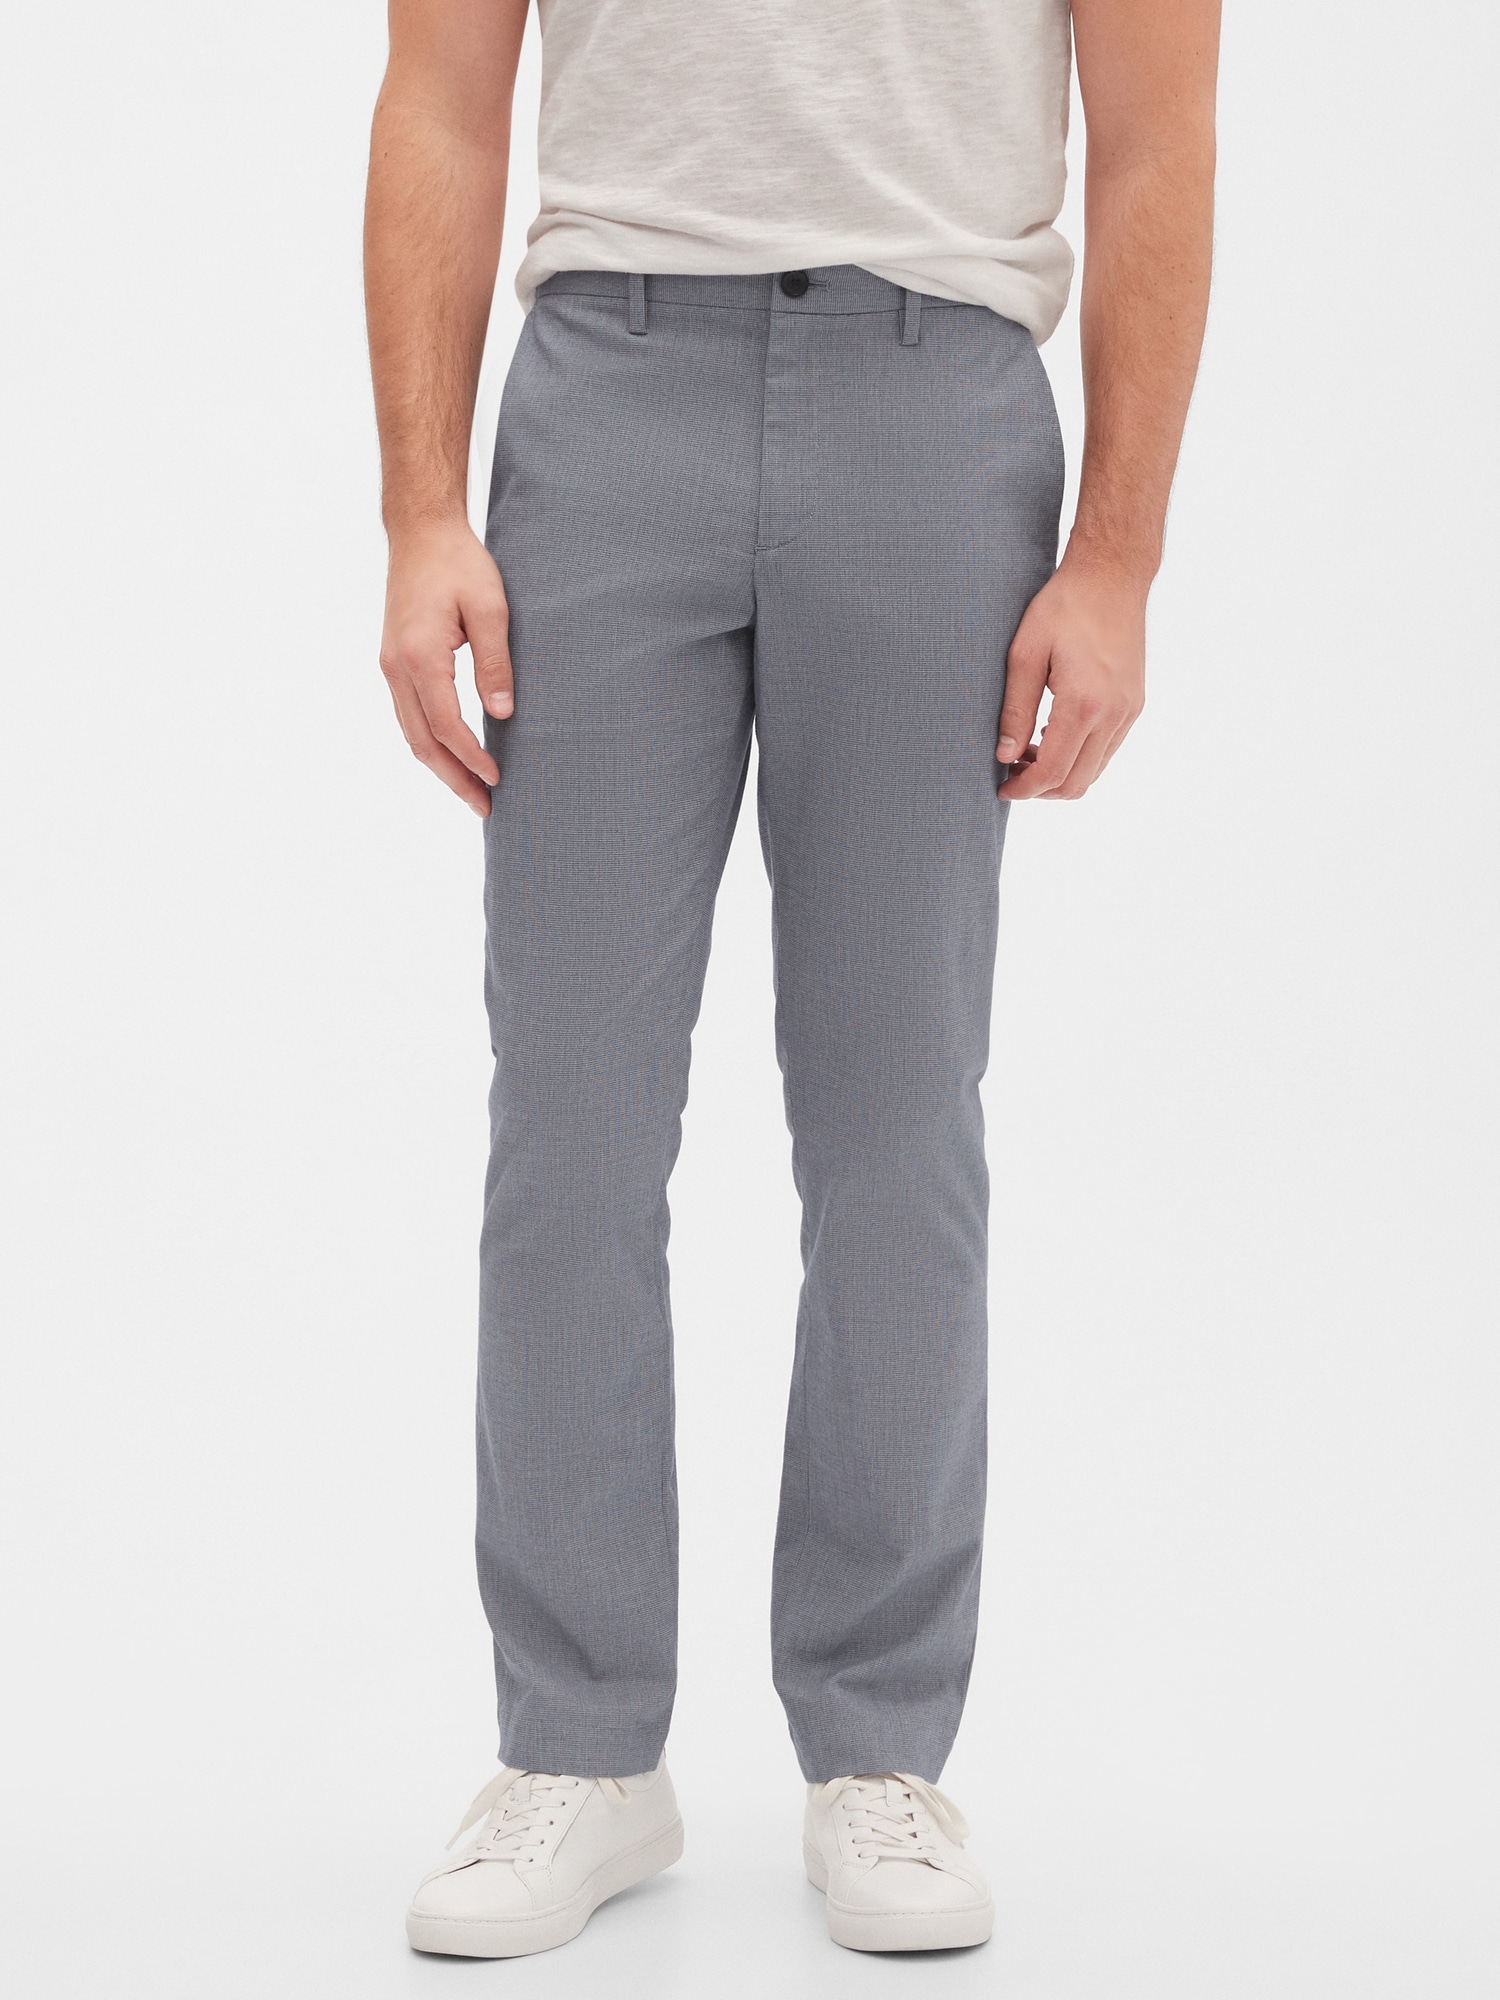 Aiden Slim-Fit Stretch Blue Oxford Pant | Banana Republic Factory